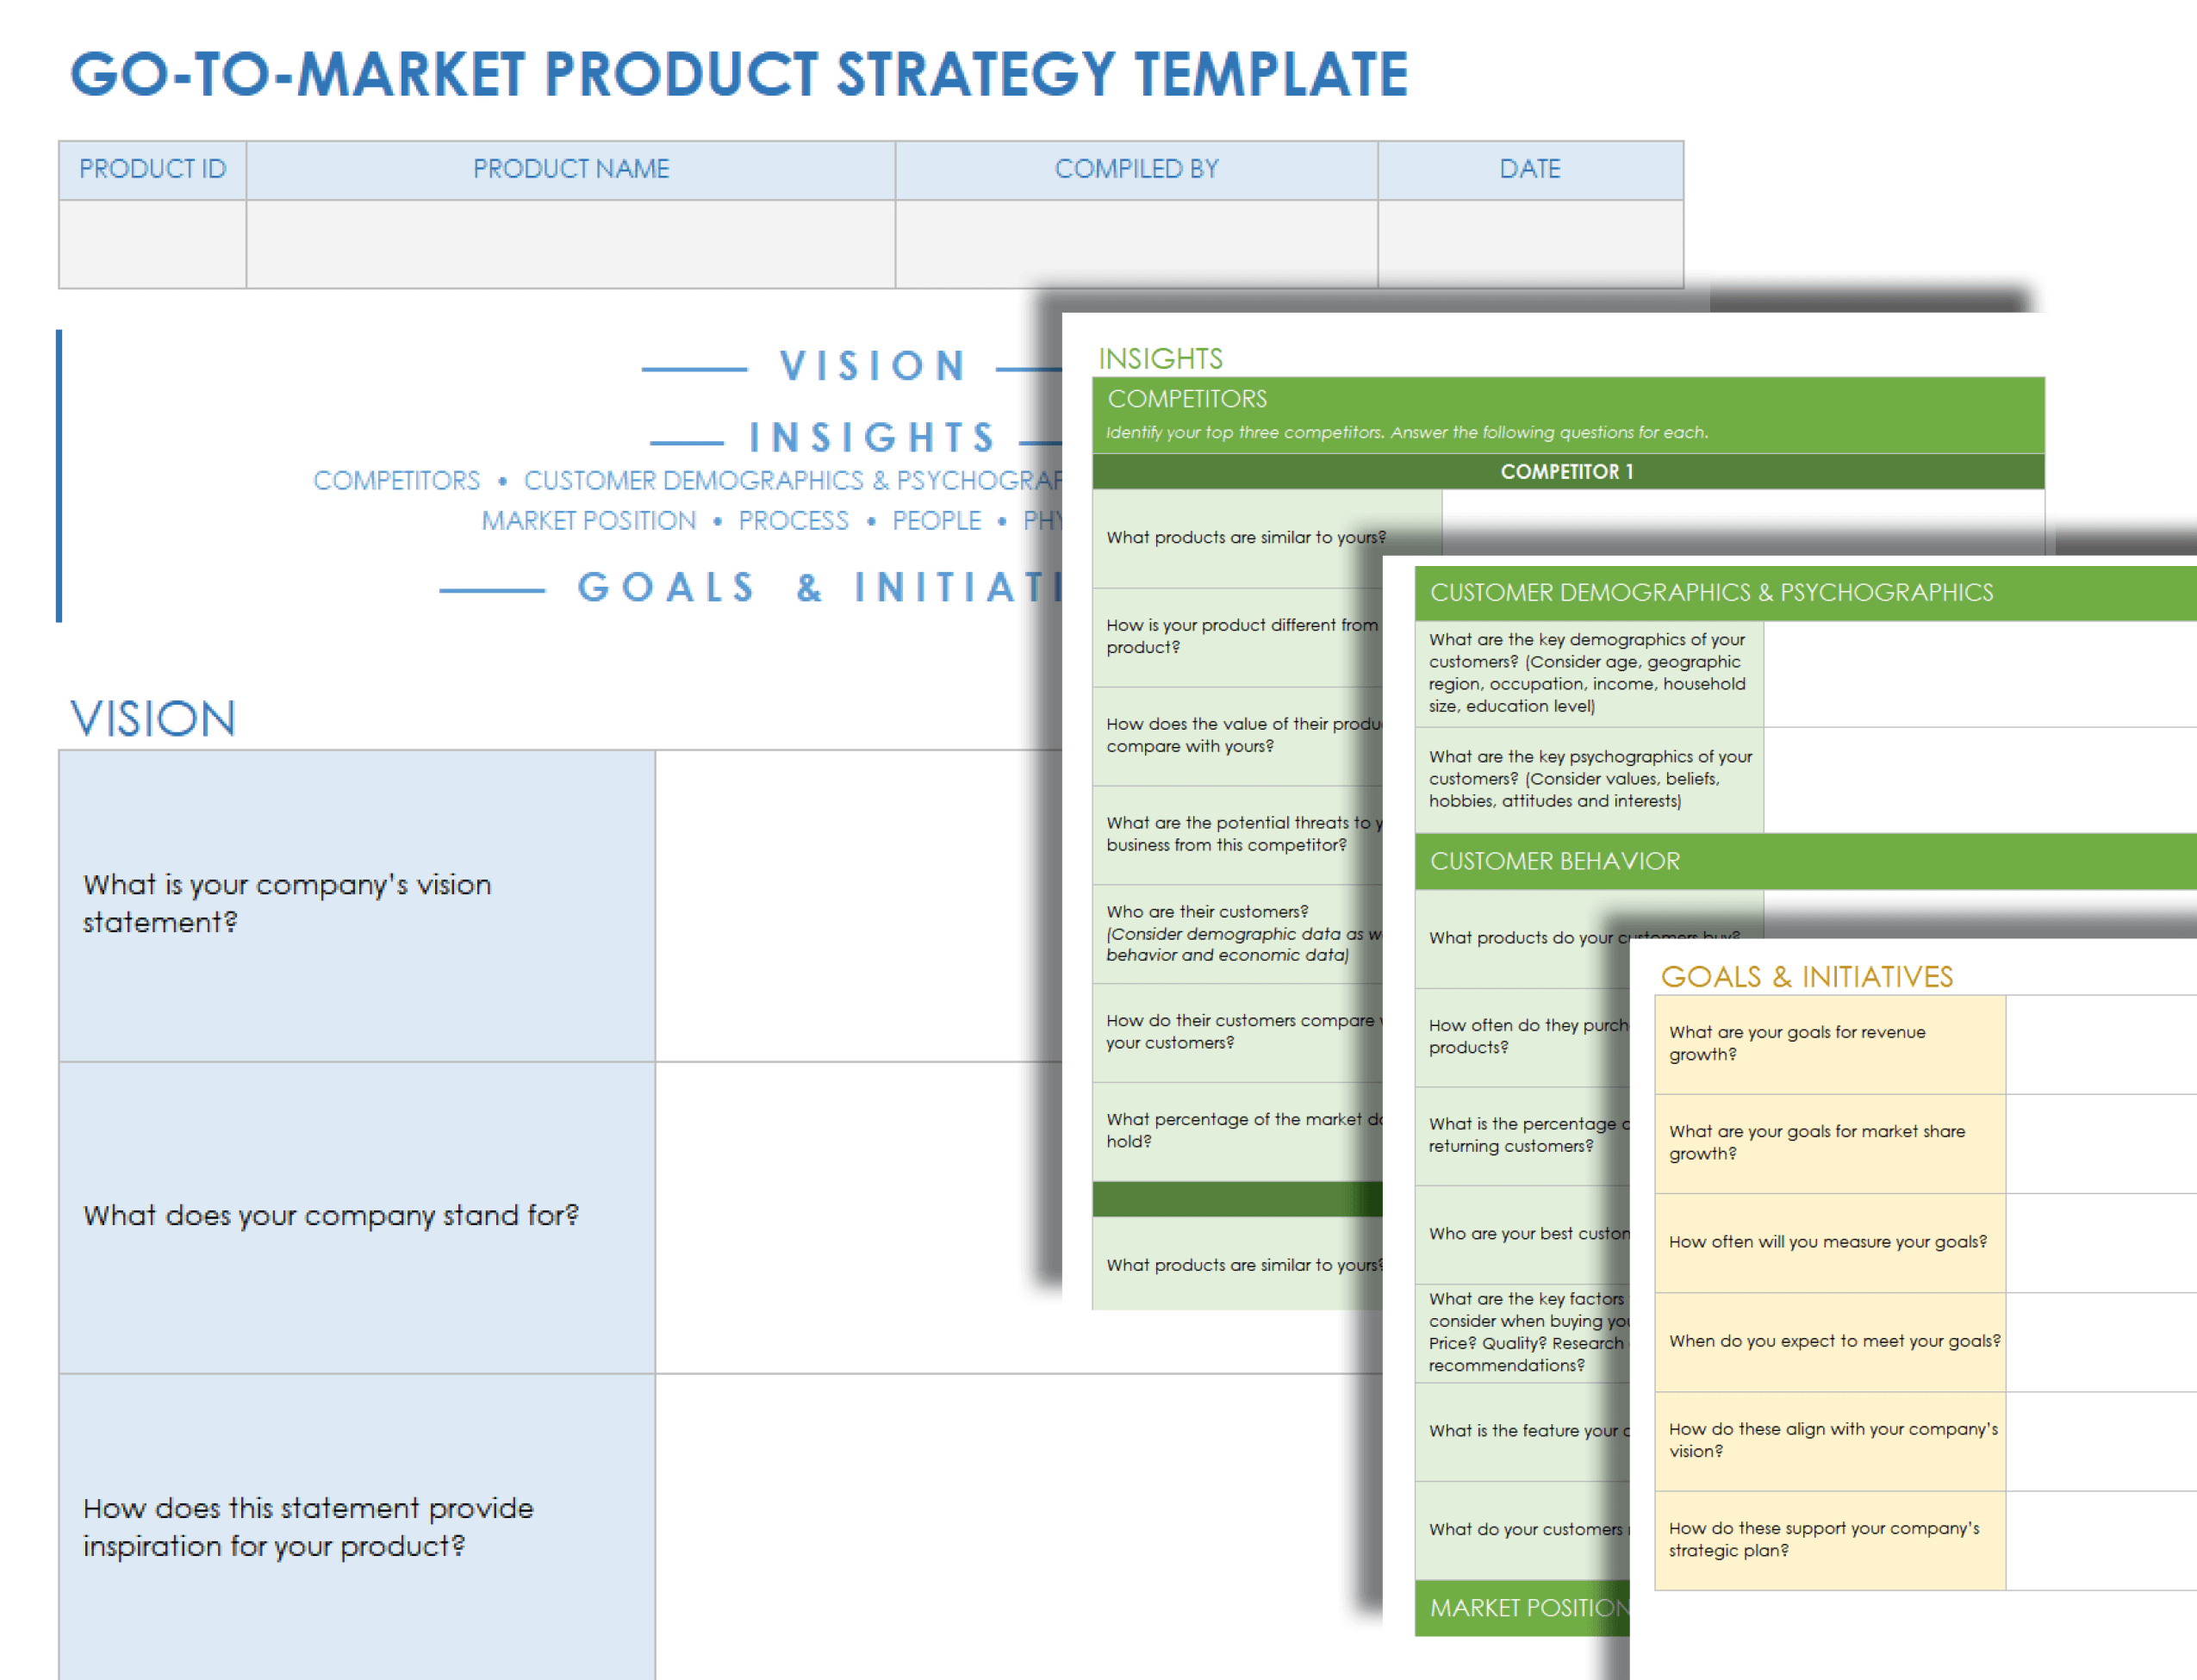 Go-to-Market Product Strategy Template